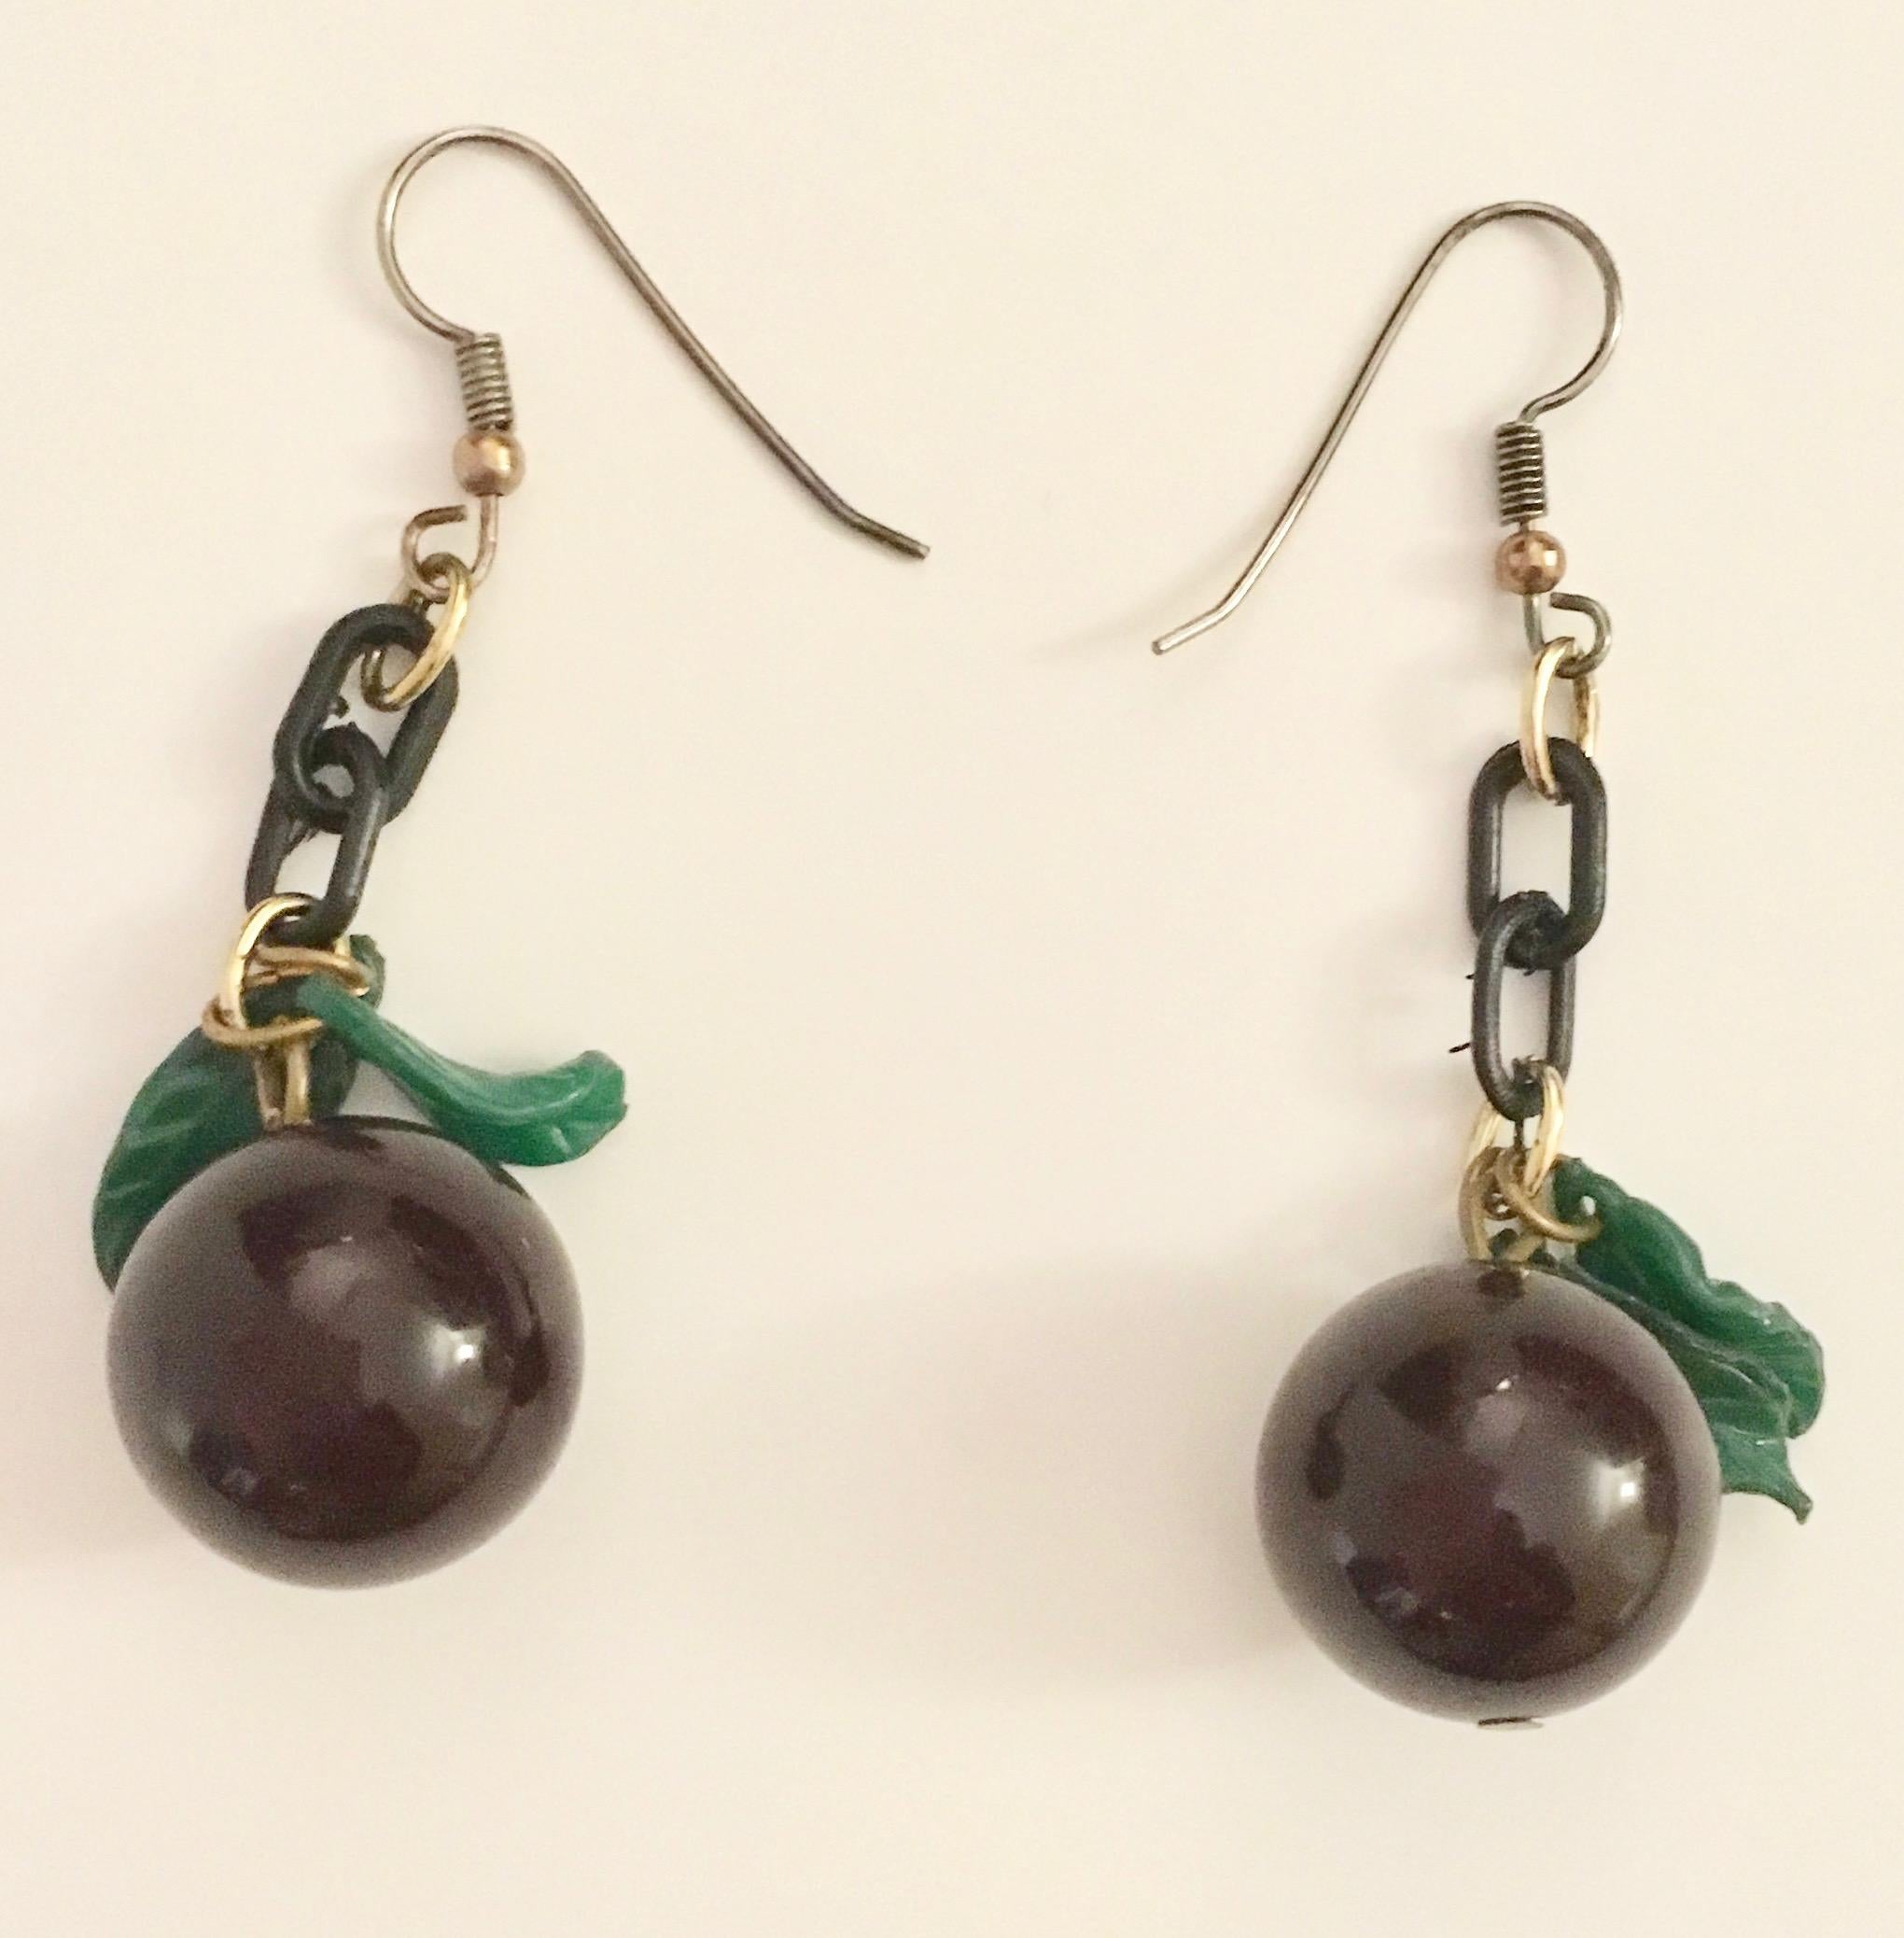 This beautiful pair of grape earrings are made from bakelite and from famed designer Jan Carlin. 